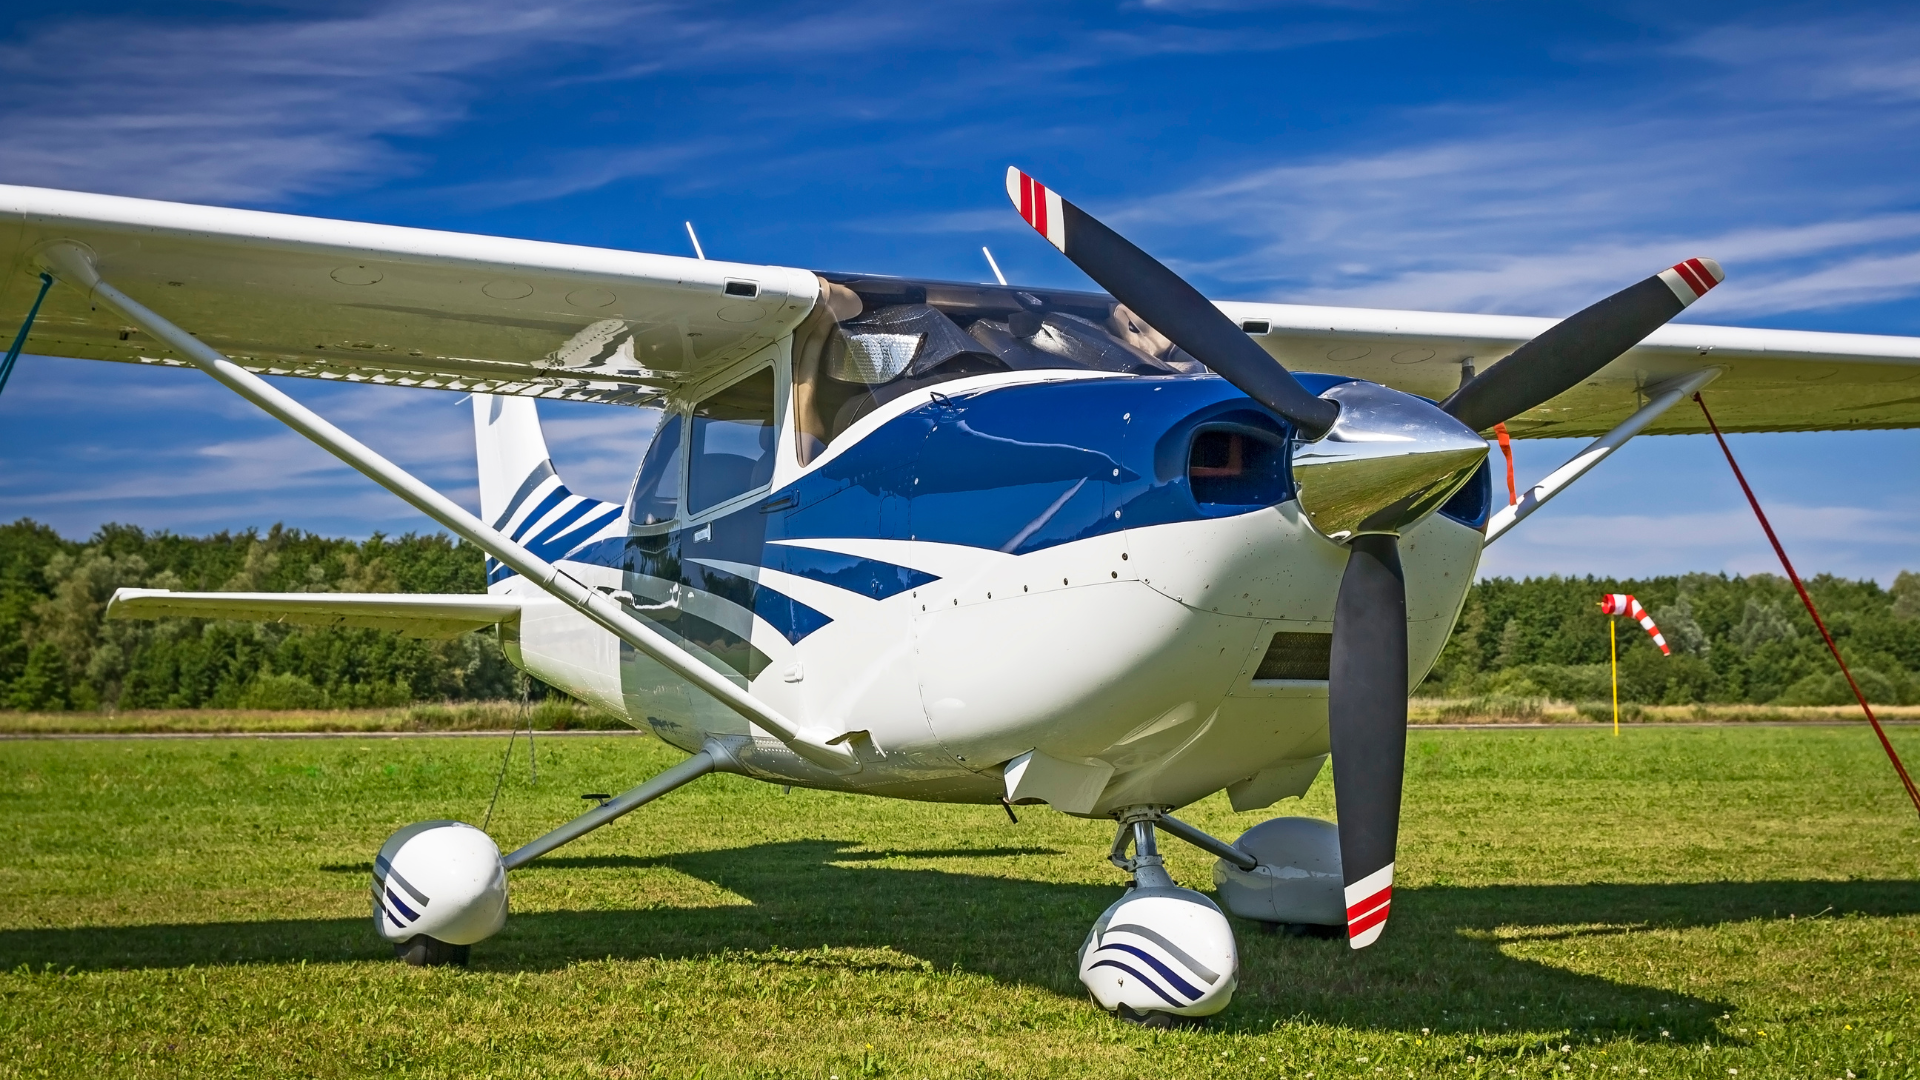 An image of a white coloured light aircraft stationary on the ground.